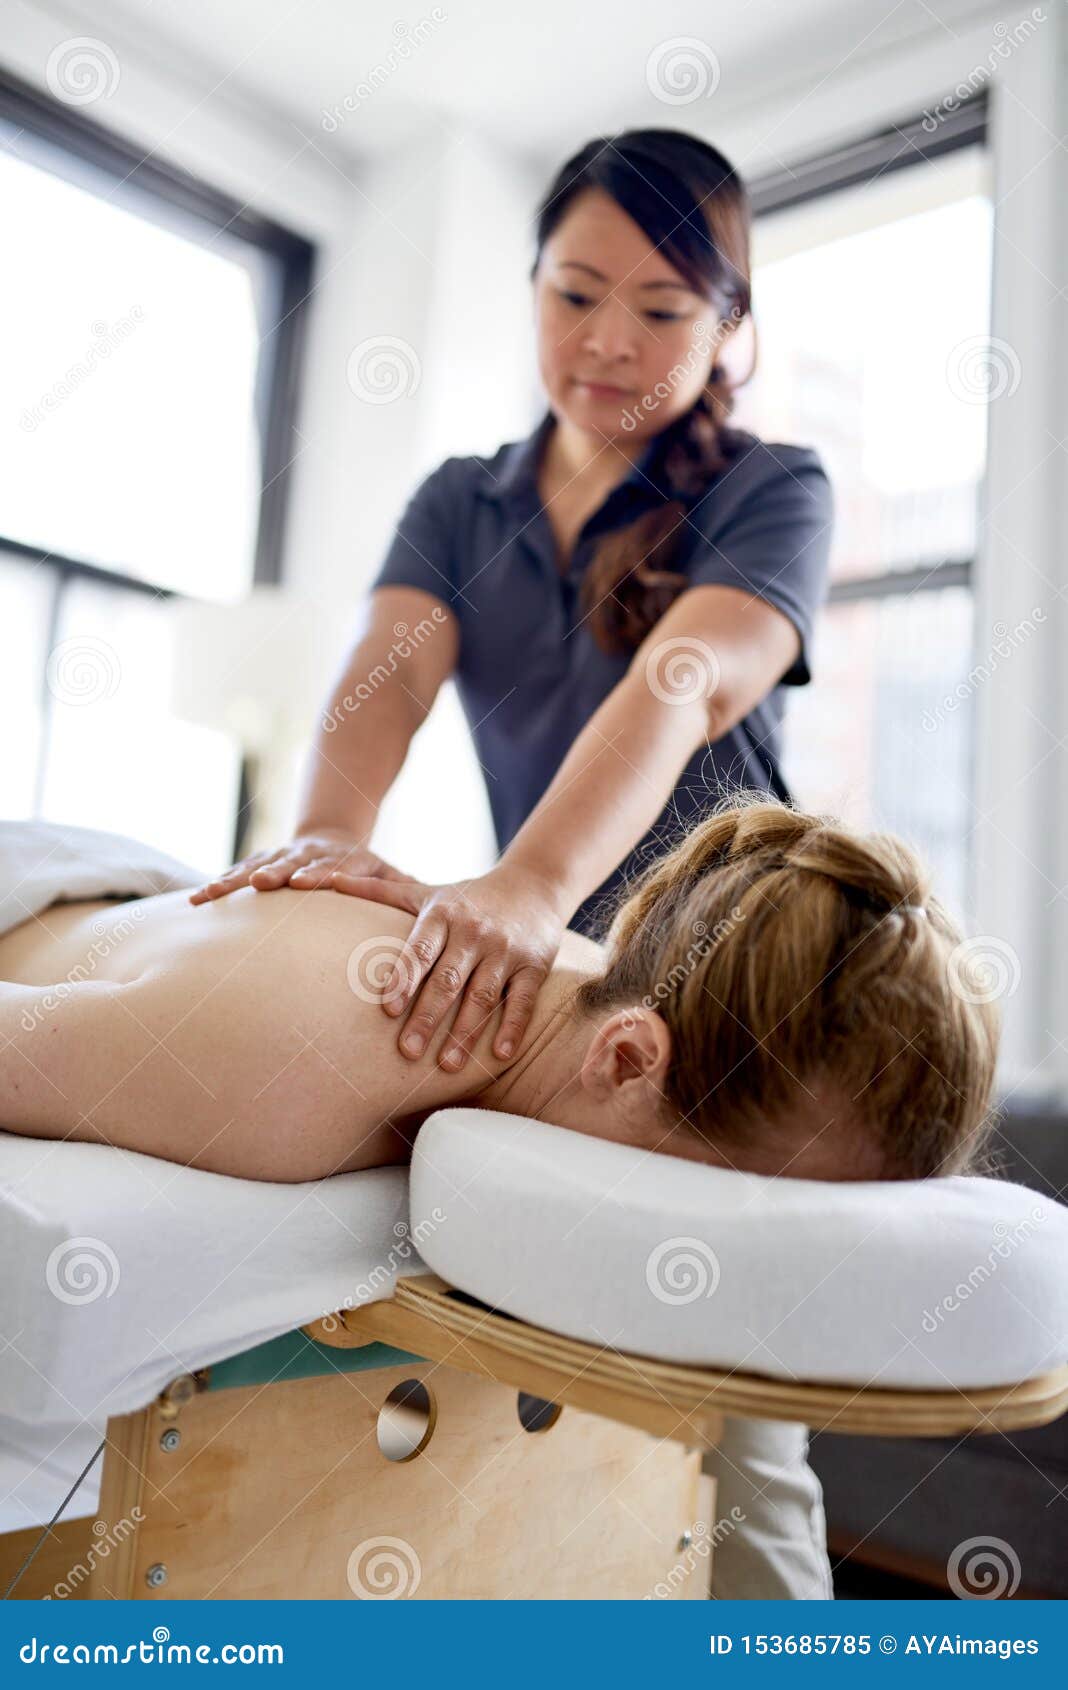 Chinese Woman Massage Therapist Giving A Treatment To An Attractive